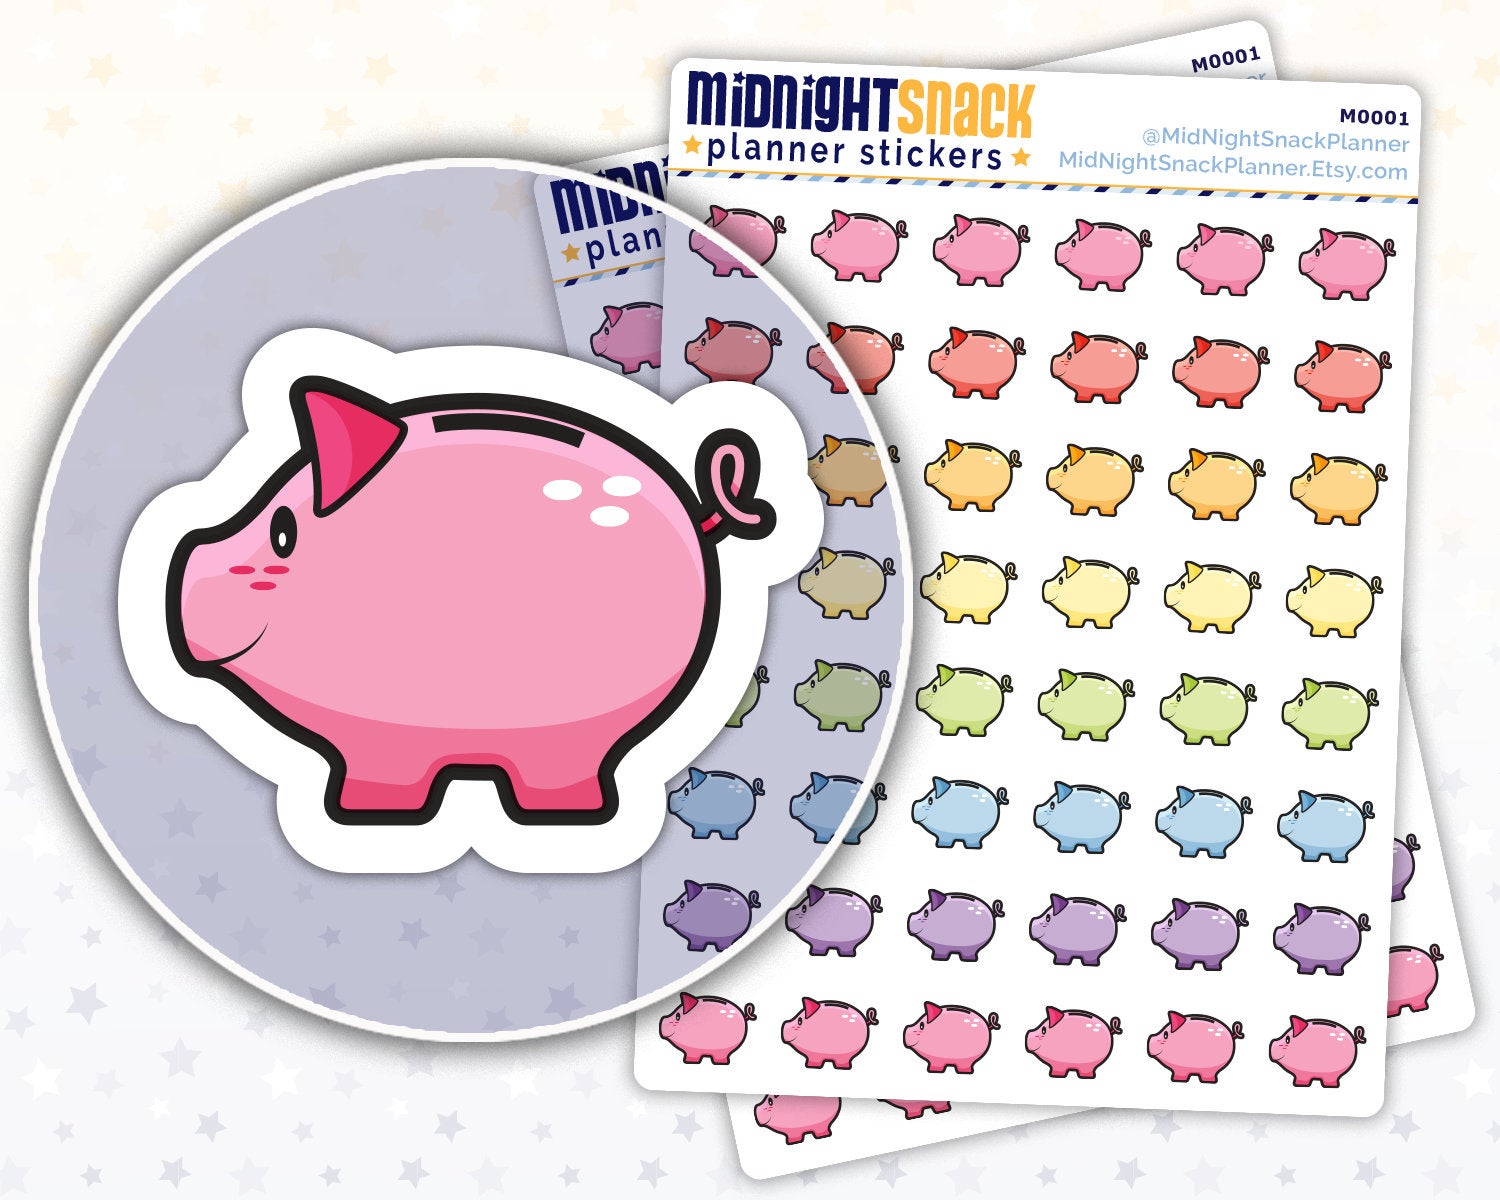 Piggy Bank Icon: Savings Account Planner Stickers Midnight Snack Planner